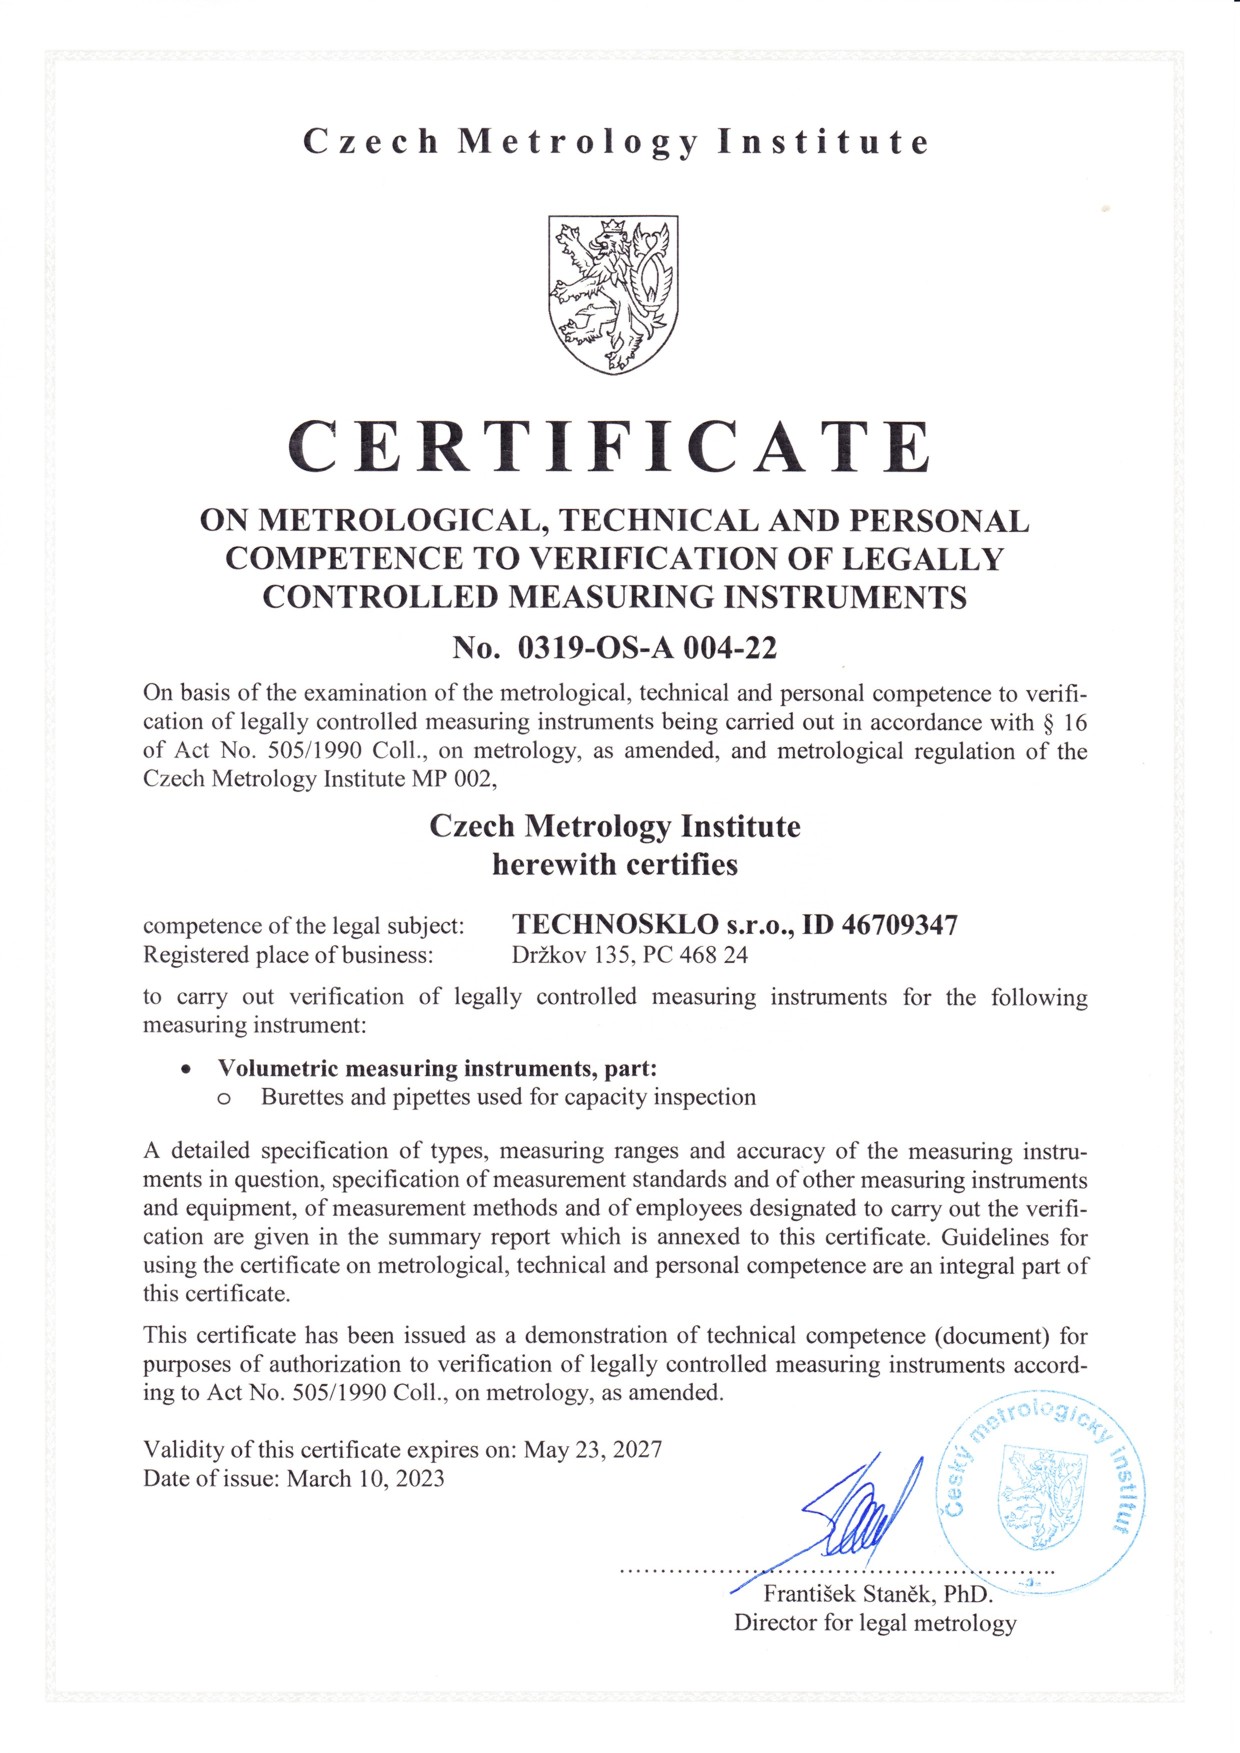 Certificate to verification of legally controlled measuring instruments